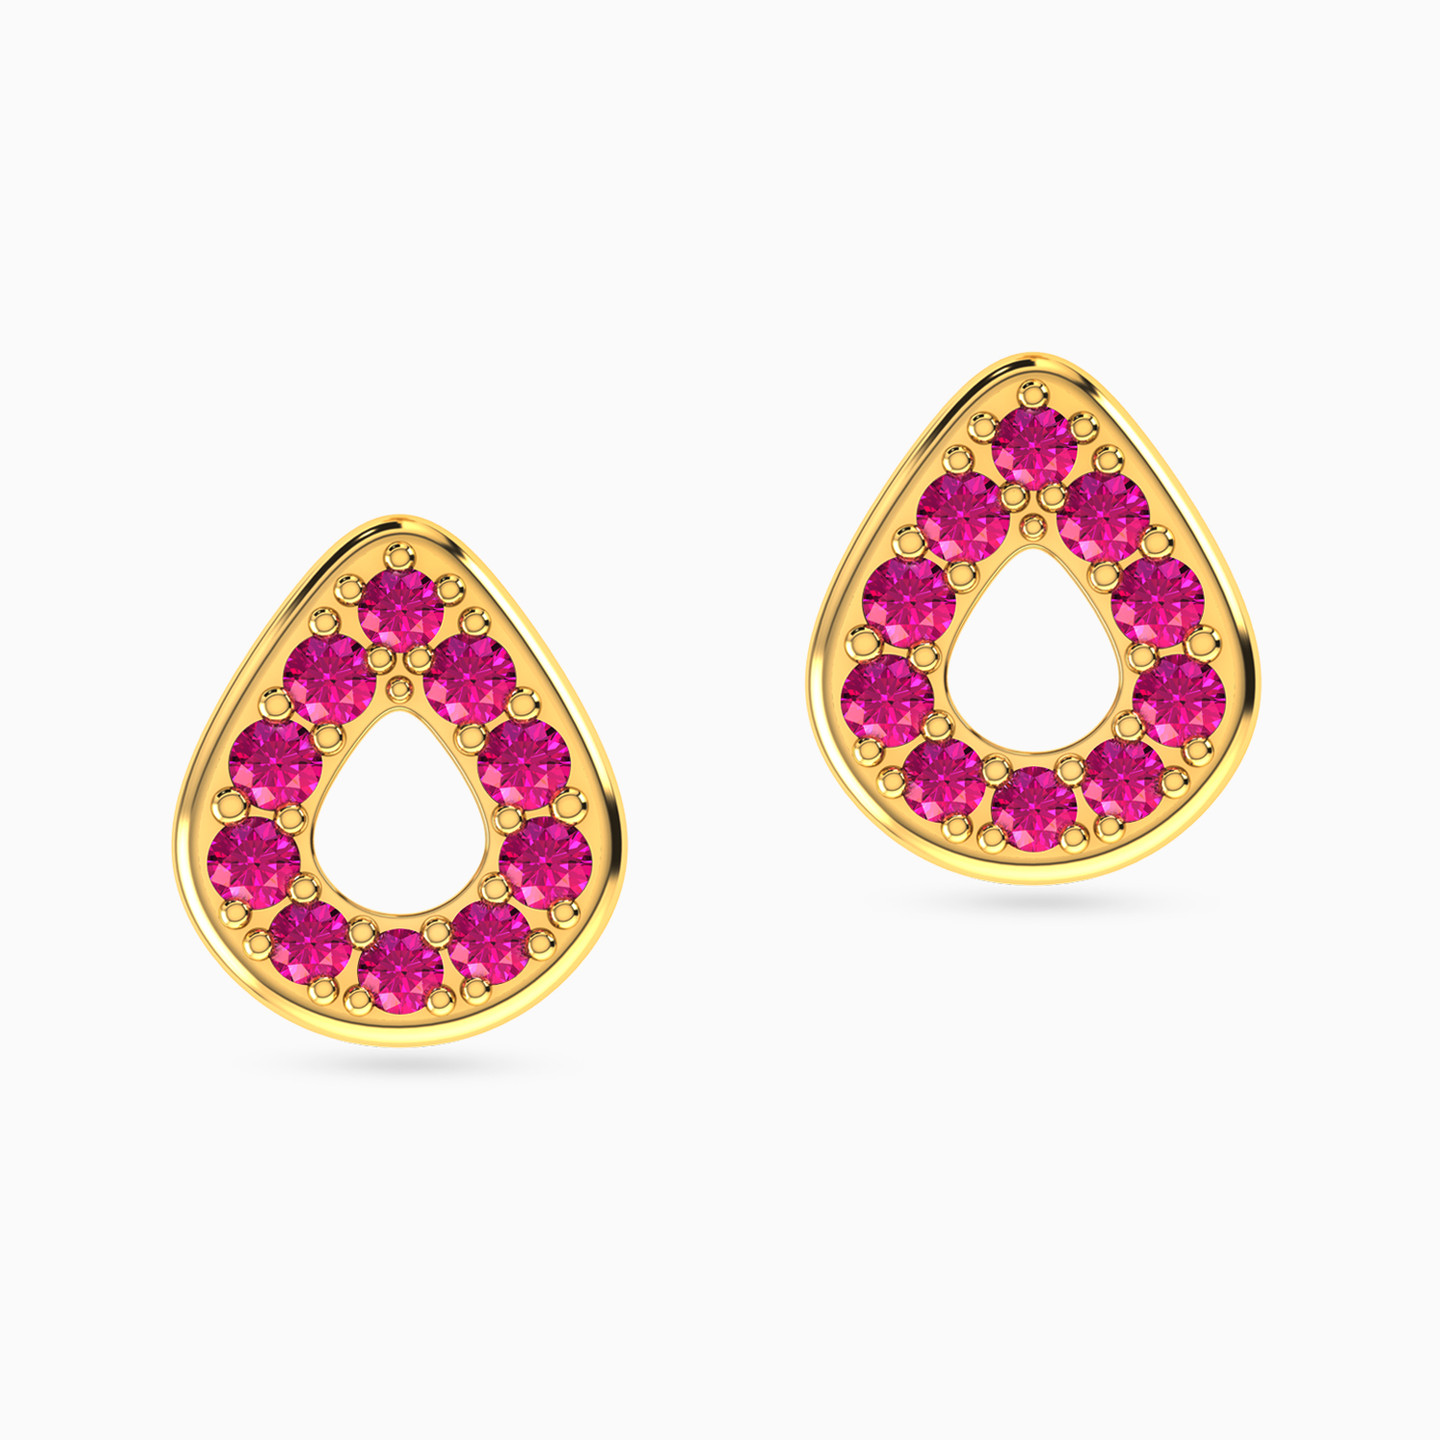 Pear Shaped Colored Stones Stud Earrings in 18K Gold